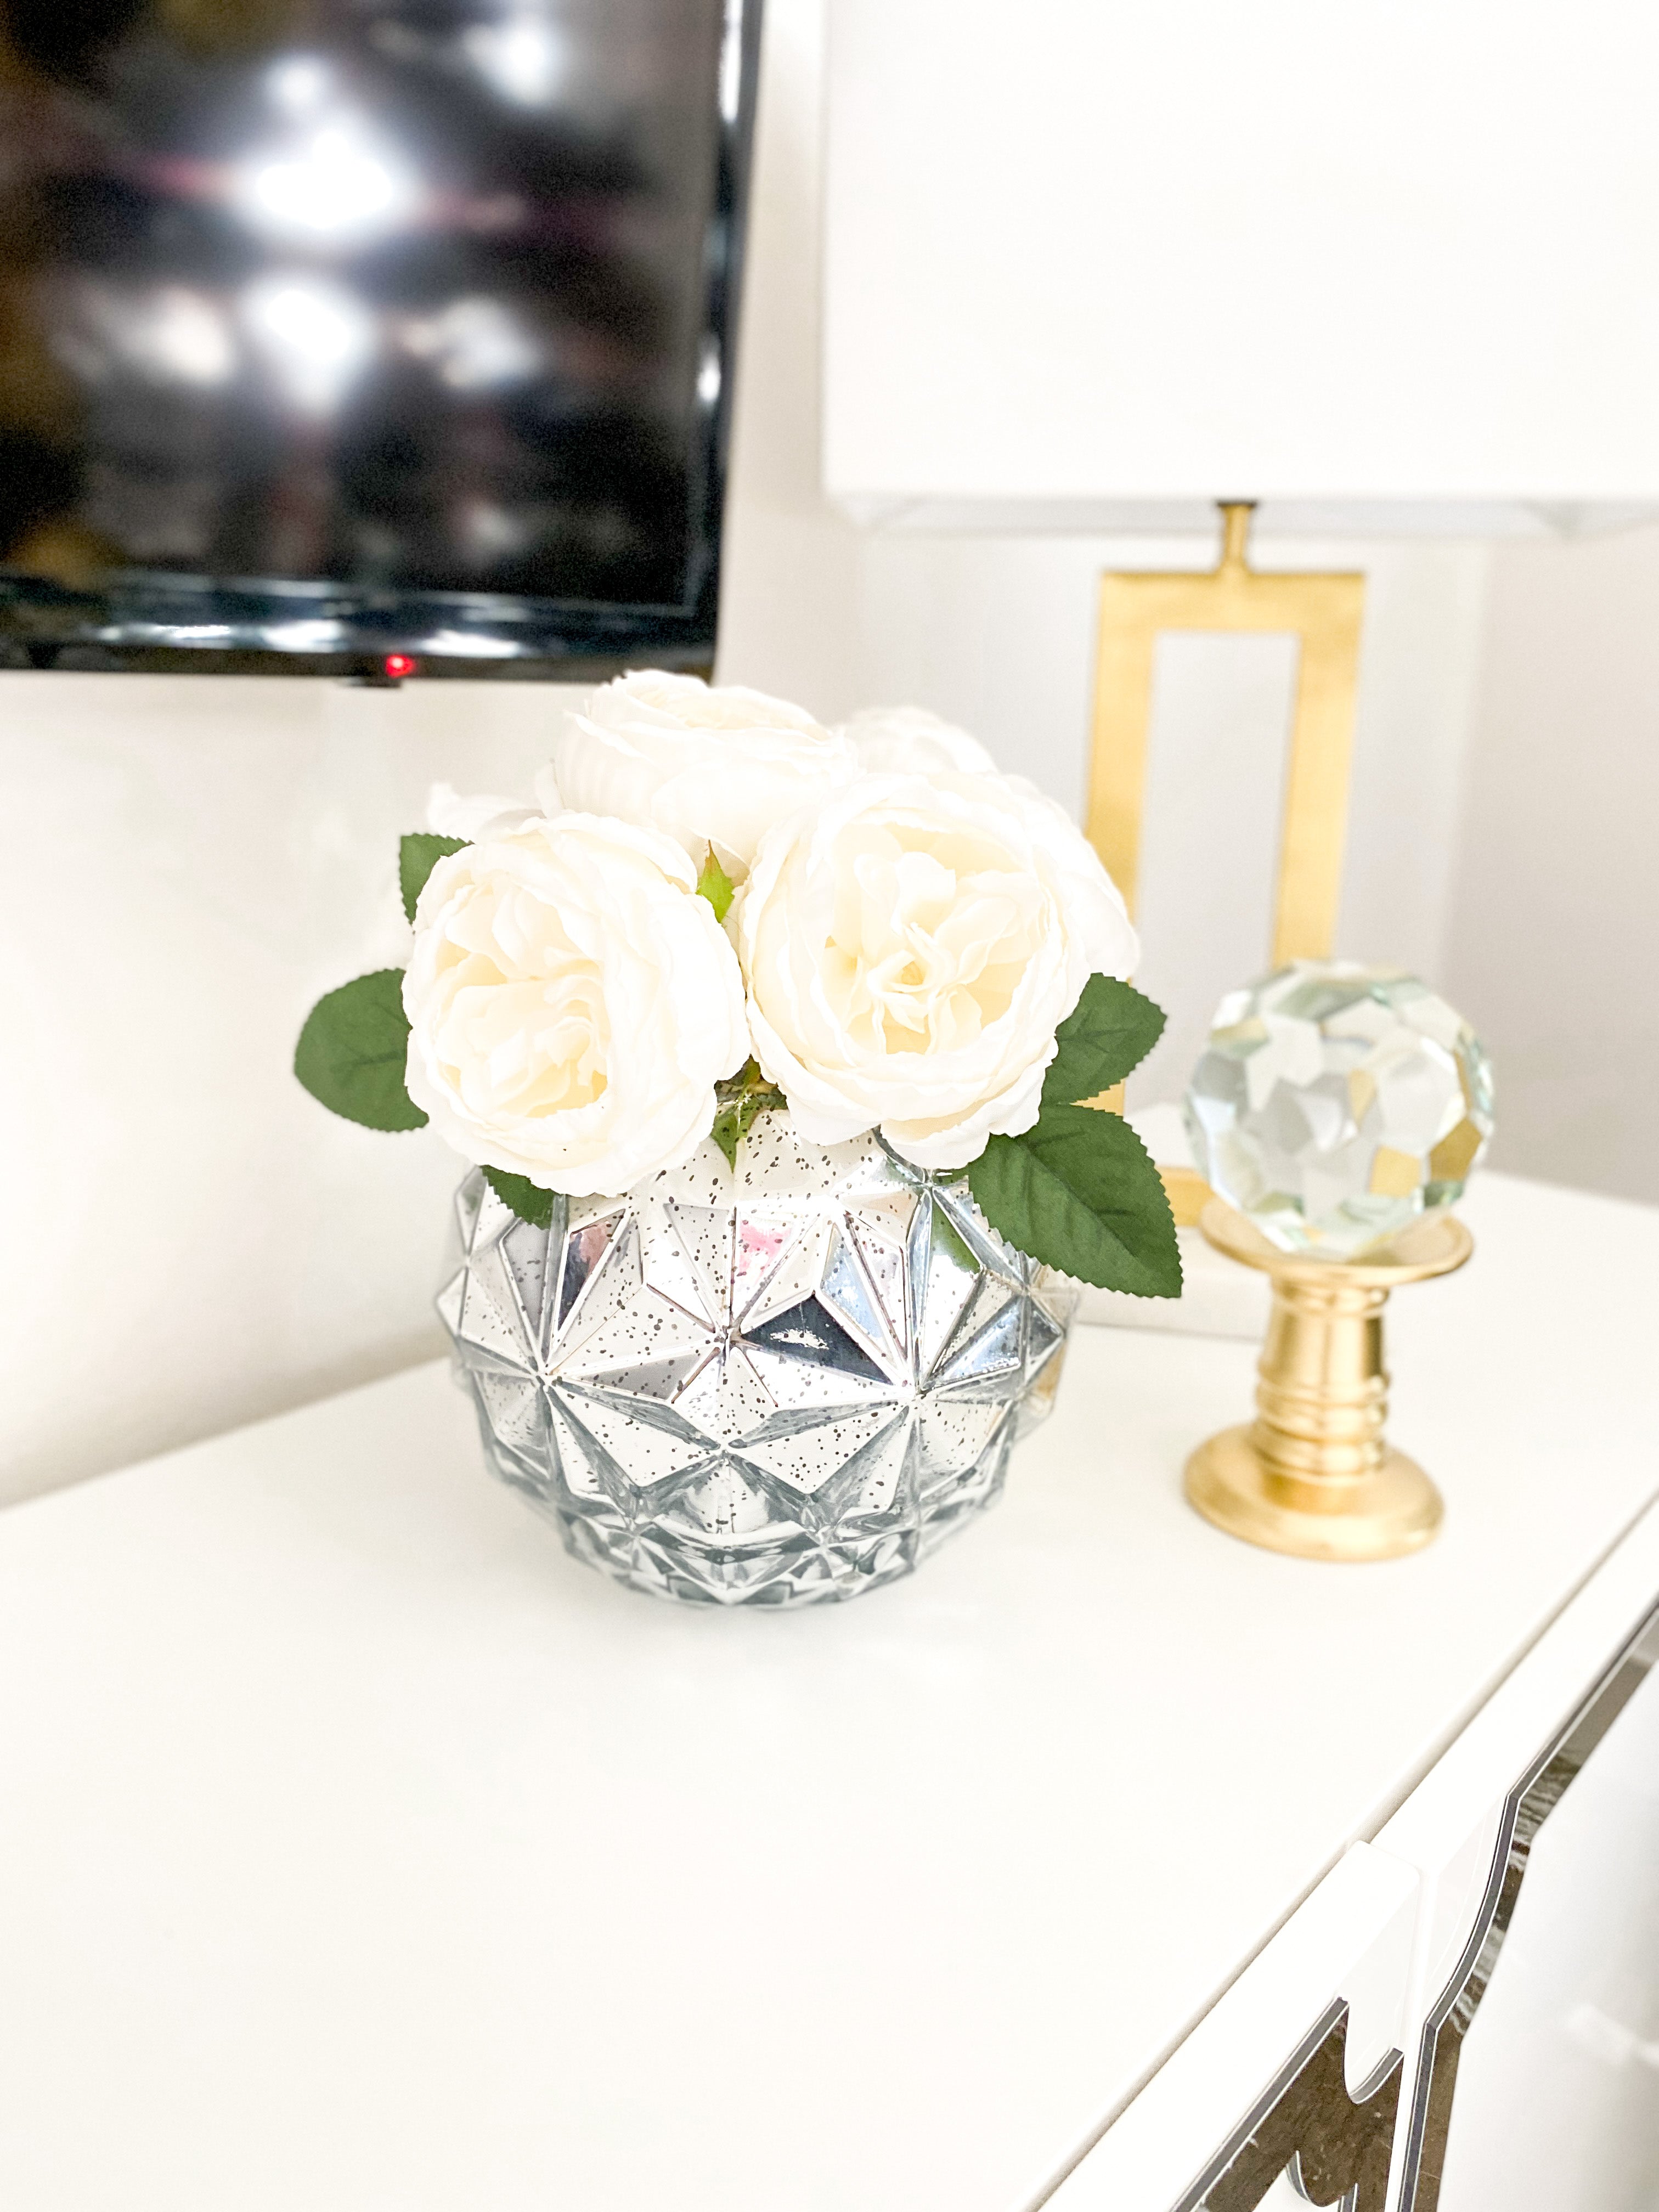 Silver Textured Orb Glass Vase - HTS HOME DECOR